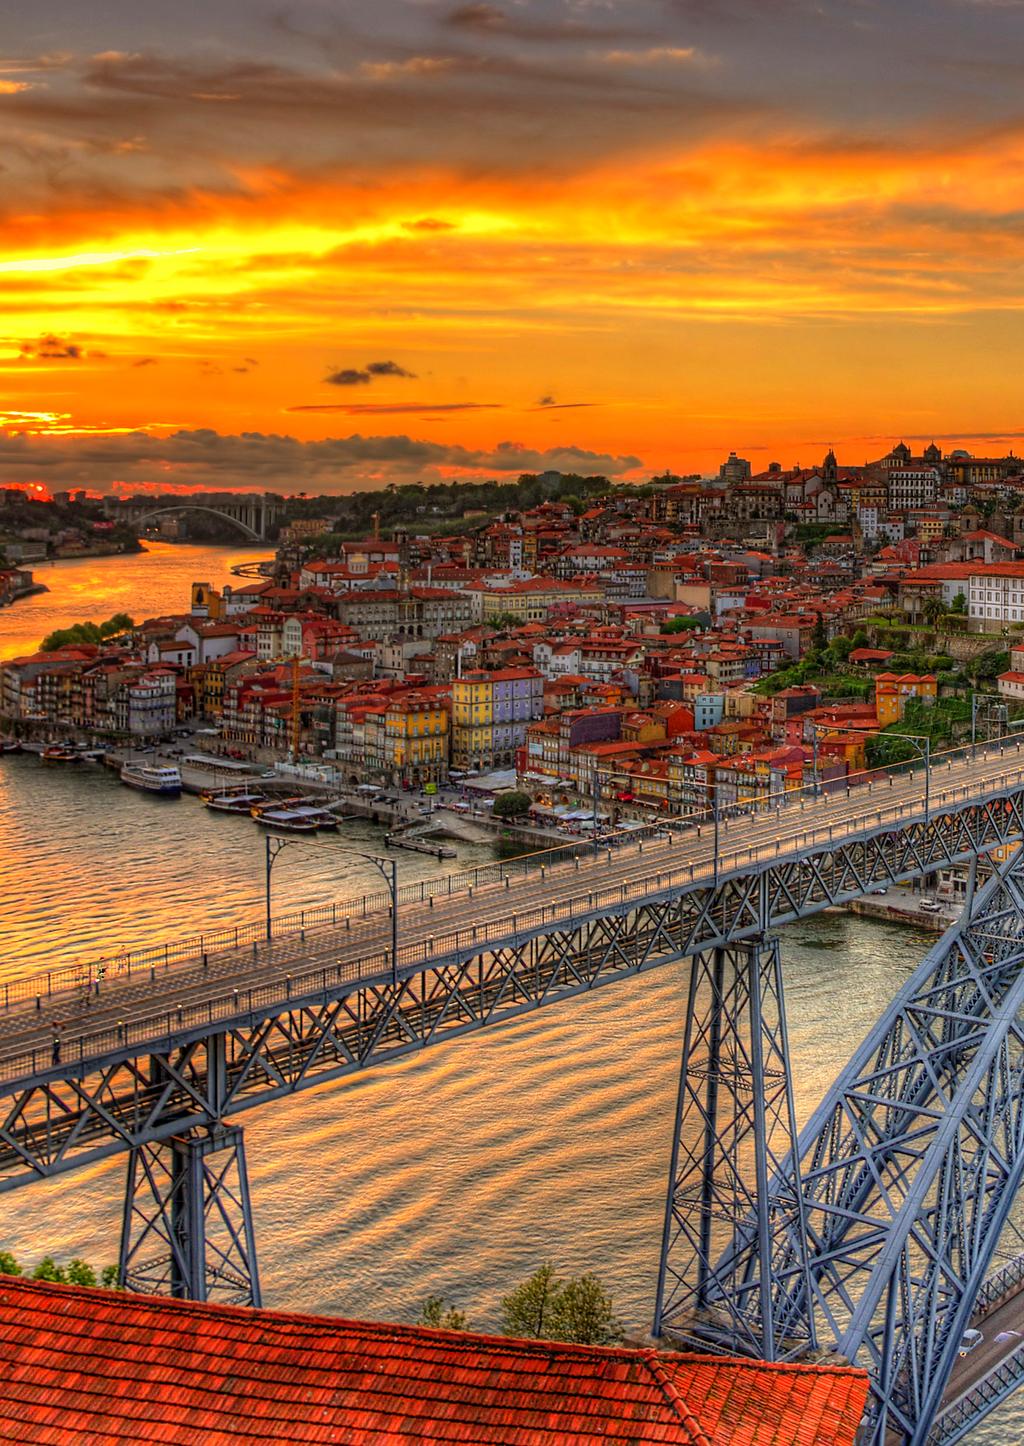 Time for Portugal/EU Residency 6-8 months Time for Portugal/EU citizenship 72 months Investment Real estate Amount